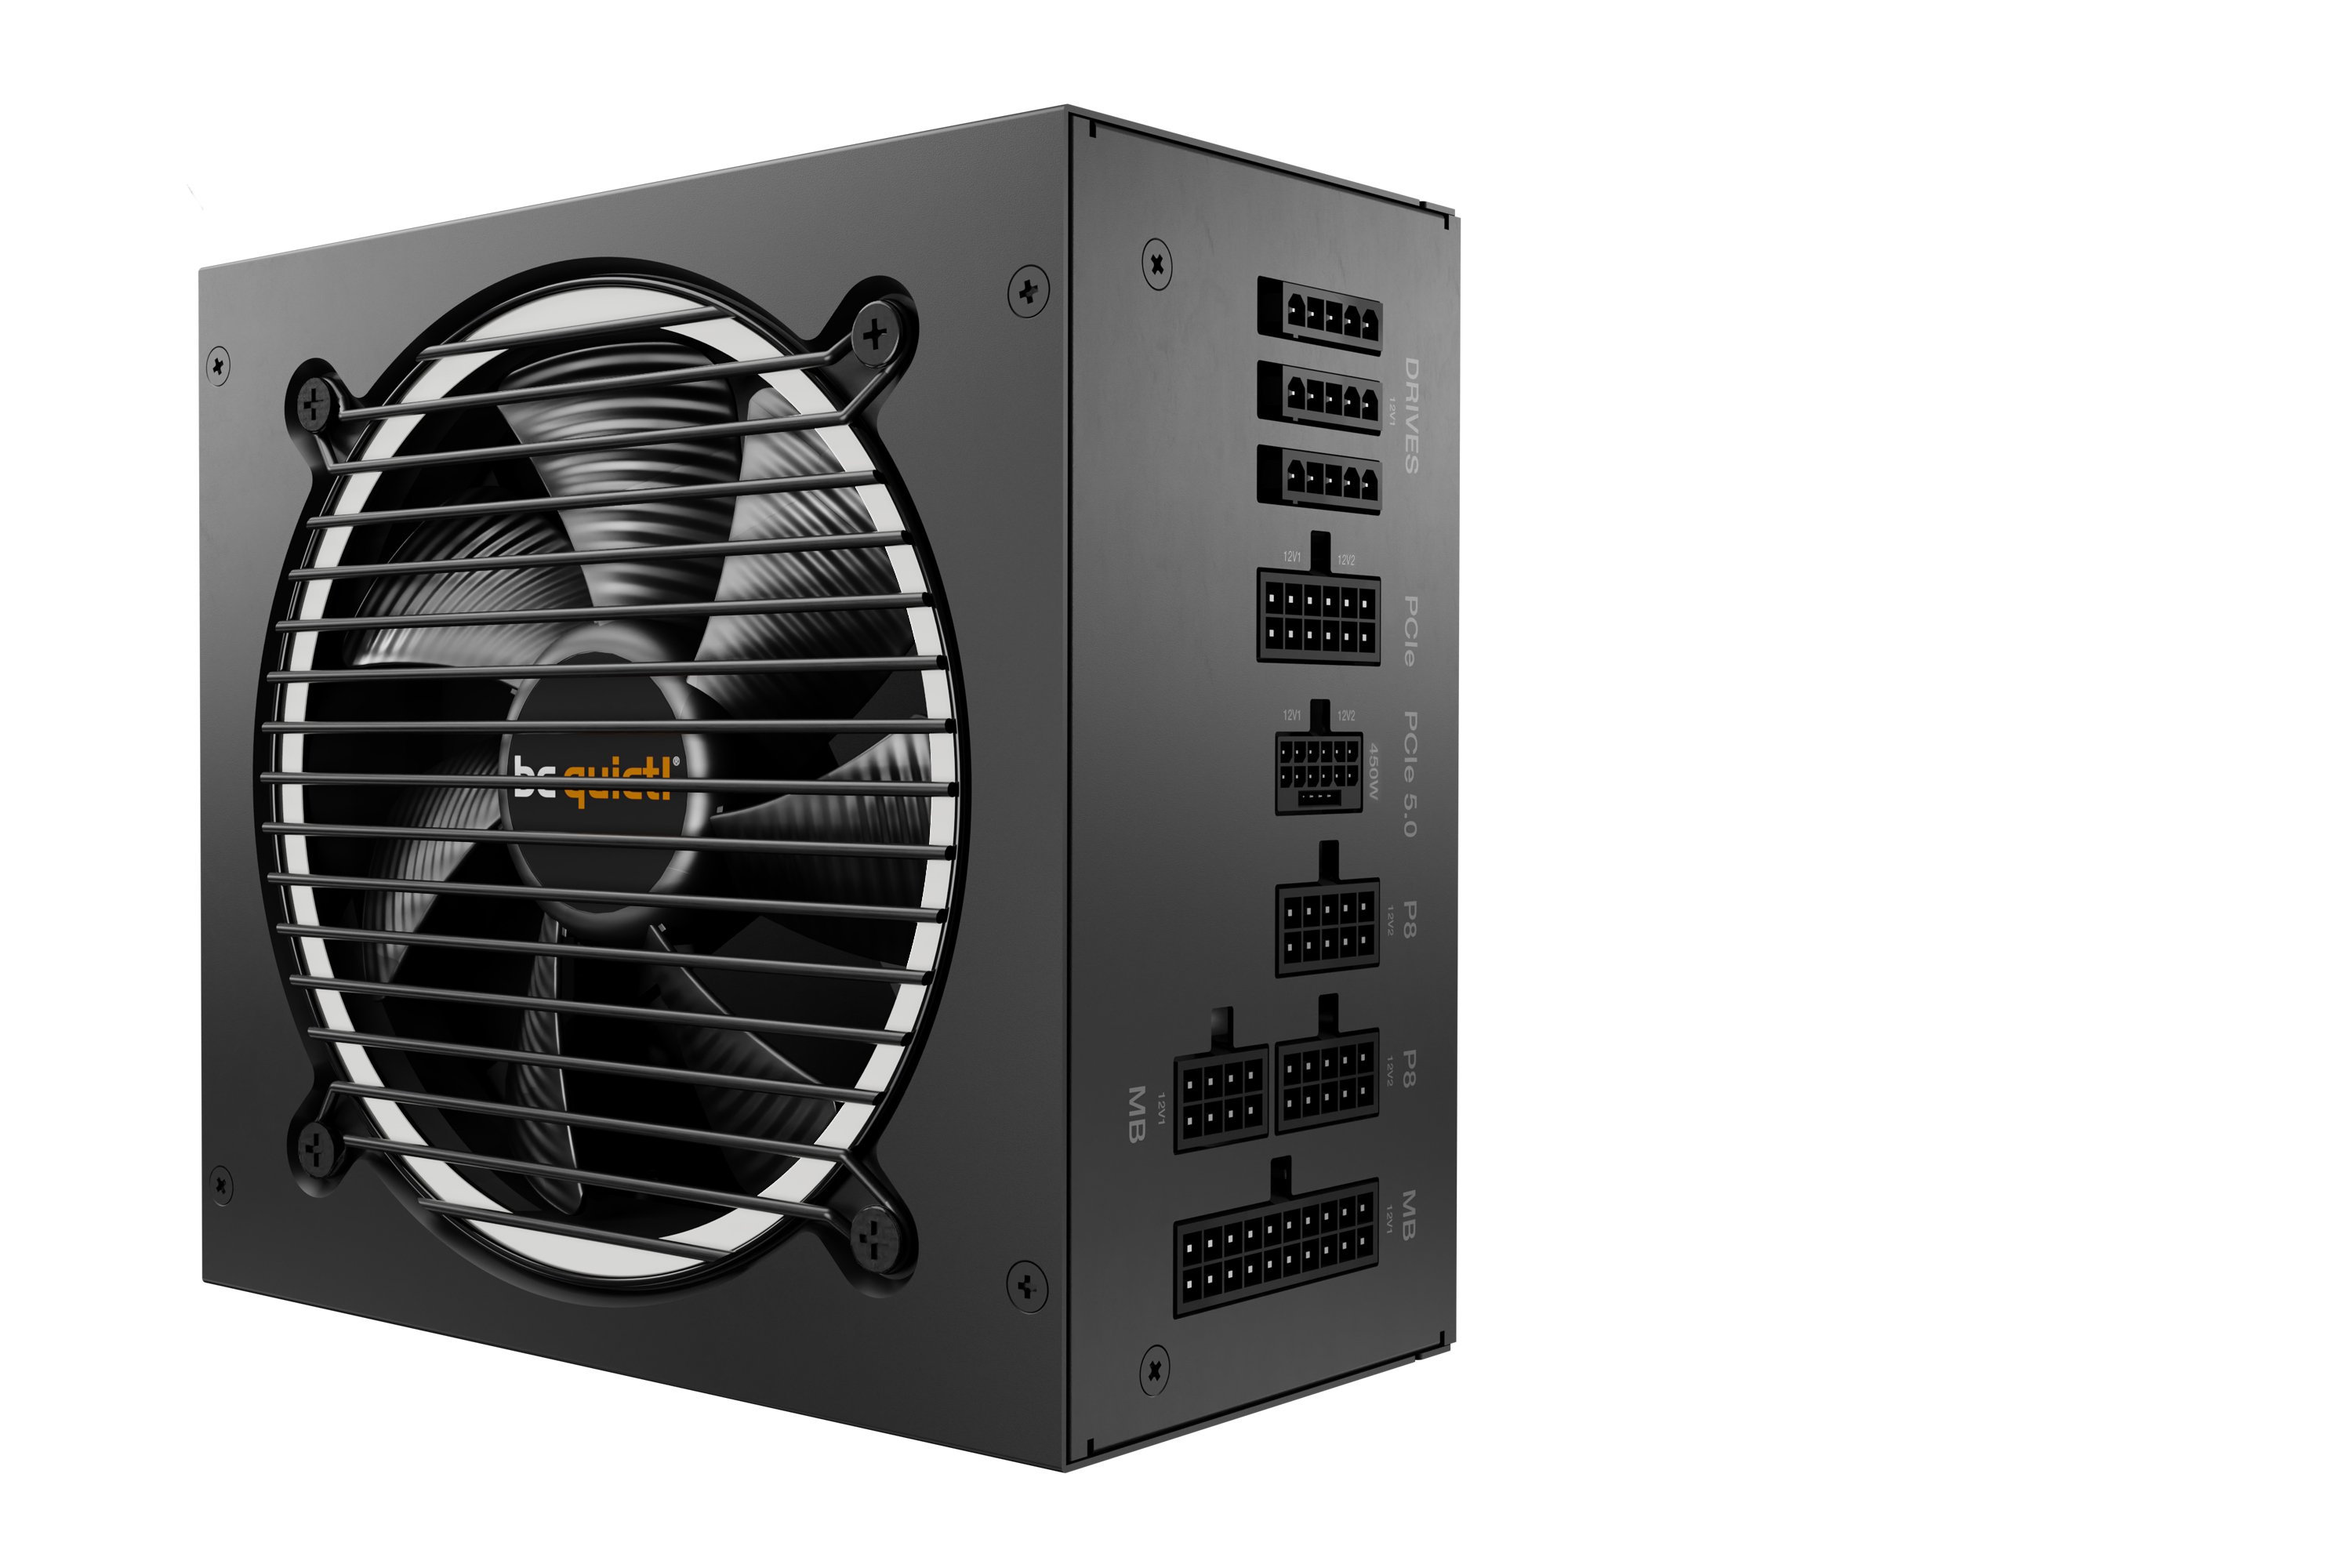 Alimentation ATX Be Quiet System Power 9 - 500W - Discomputer